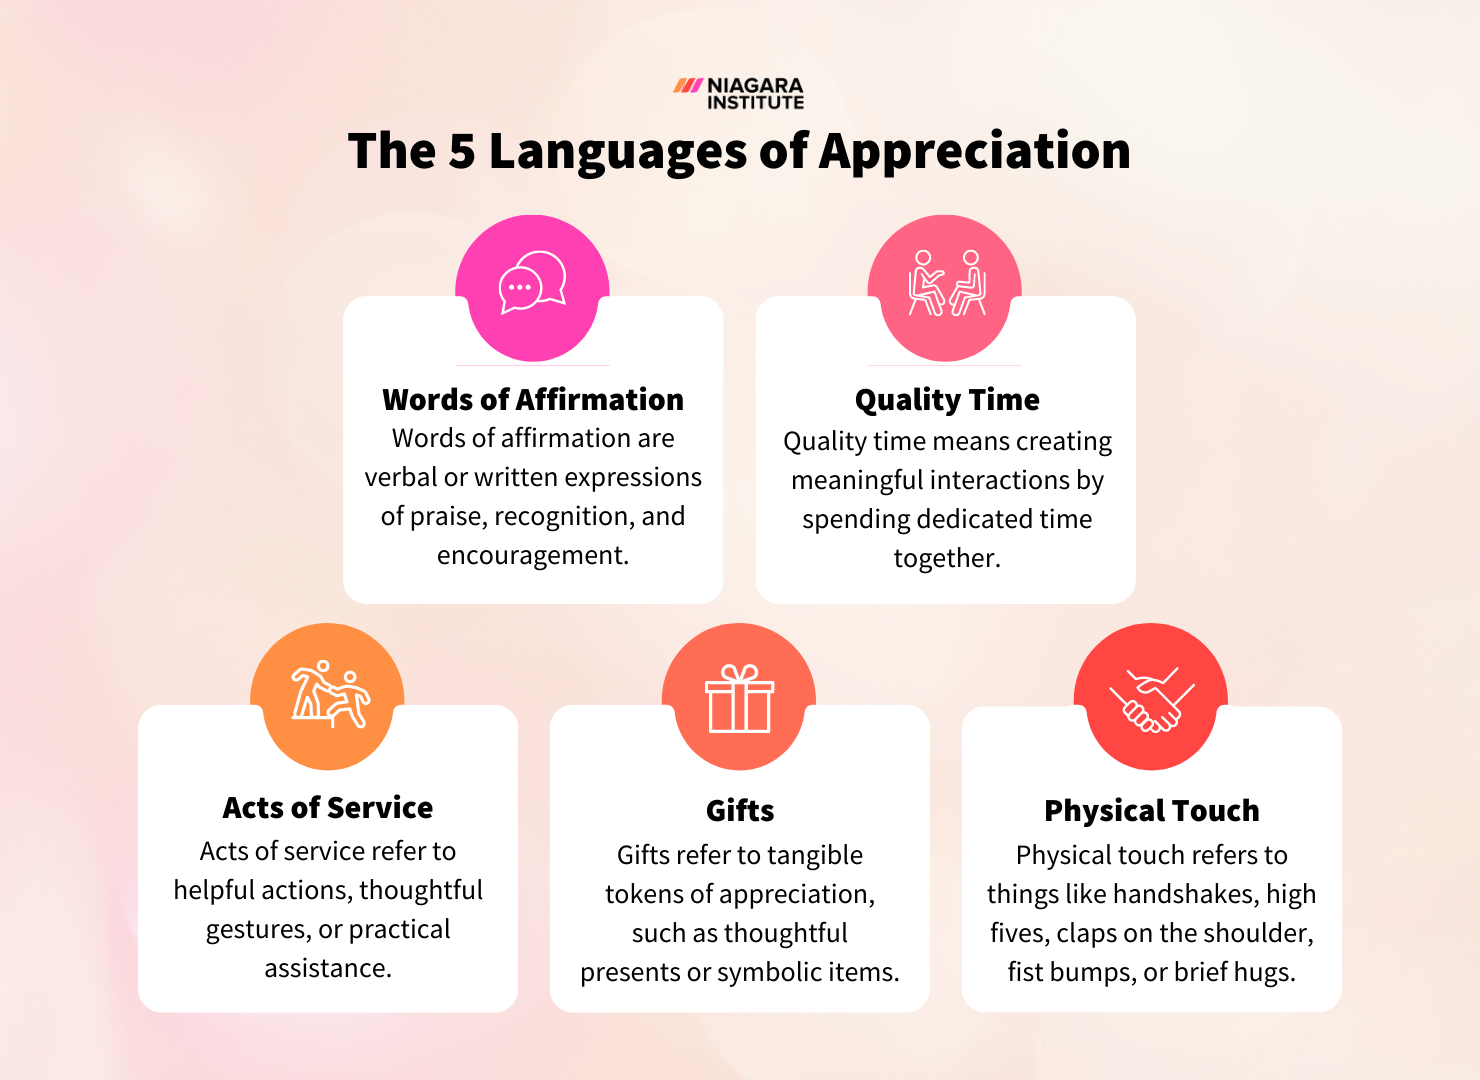 How to lead with appreciation at work